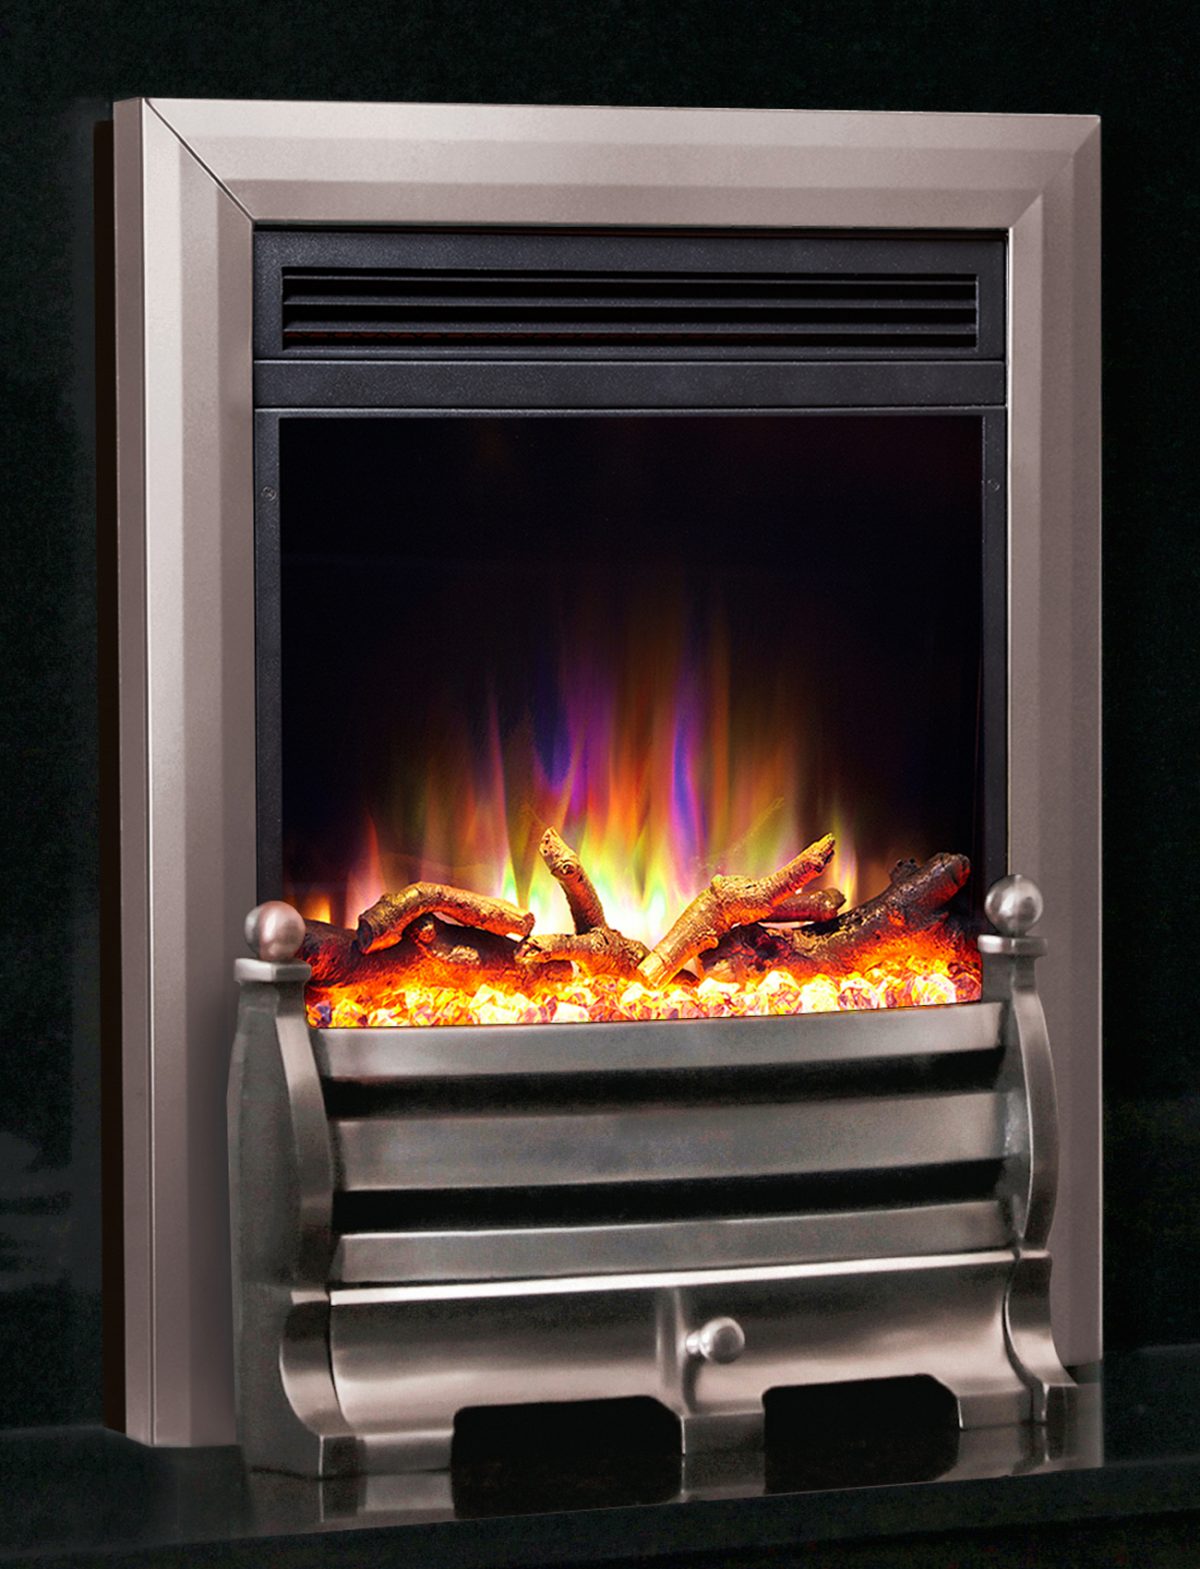 Celsi Electriflame XD Hearth Mounted Daisy Electric Fire in Satin Silver